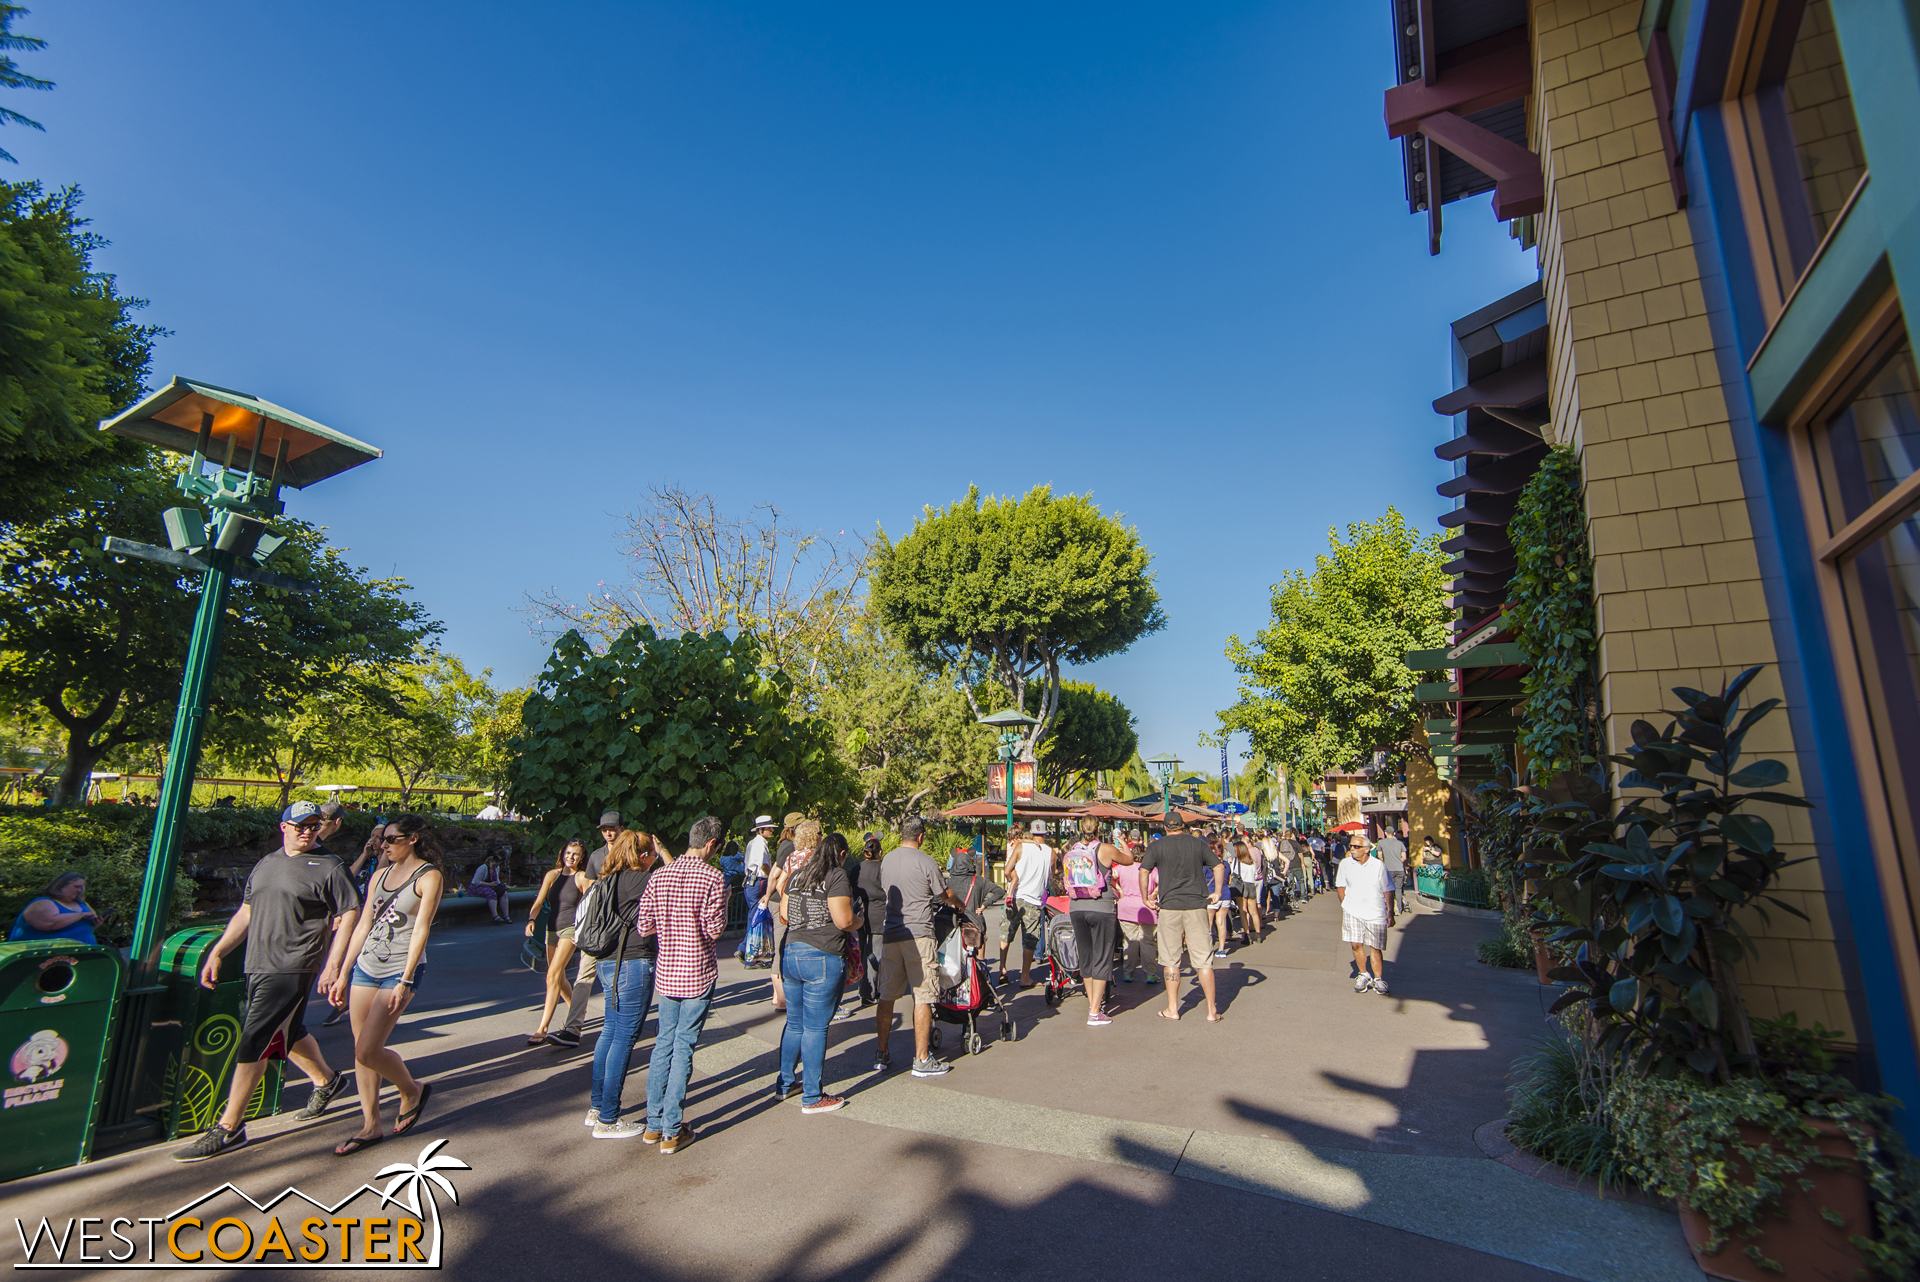  As a reminder, because of the metal detectors, the lines can get pretty long.&nbsp; In this case, the main Esplanade security check points had lines stretching back as far as the aforementioned World of Disney west entrance!&nbsp; It's not always li